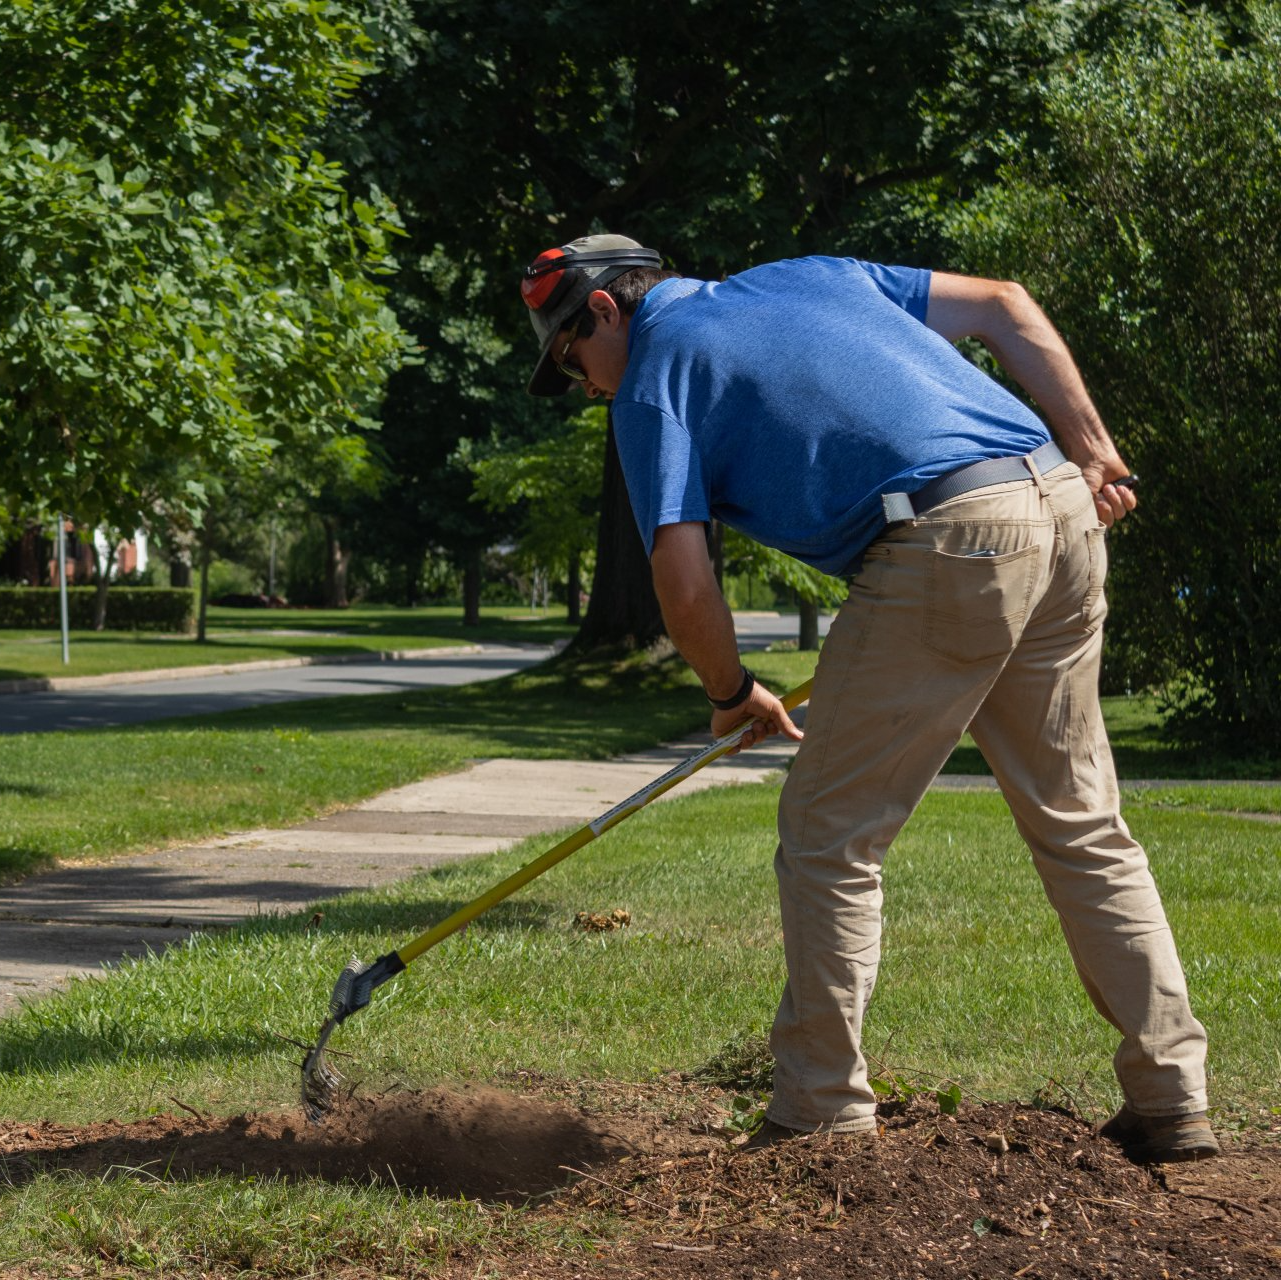 The Best lawn Care and Stump Removal in Mechanicsburg Pennsylvania